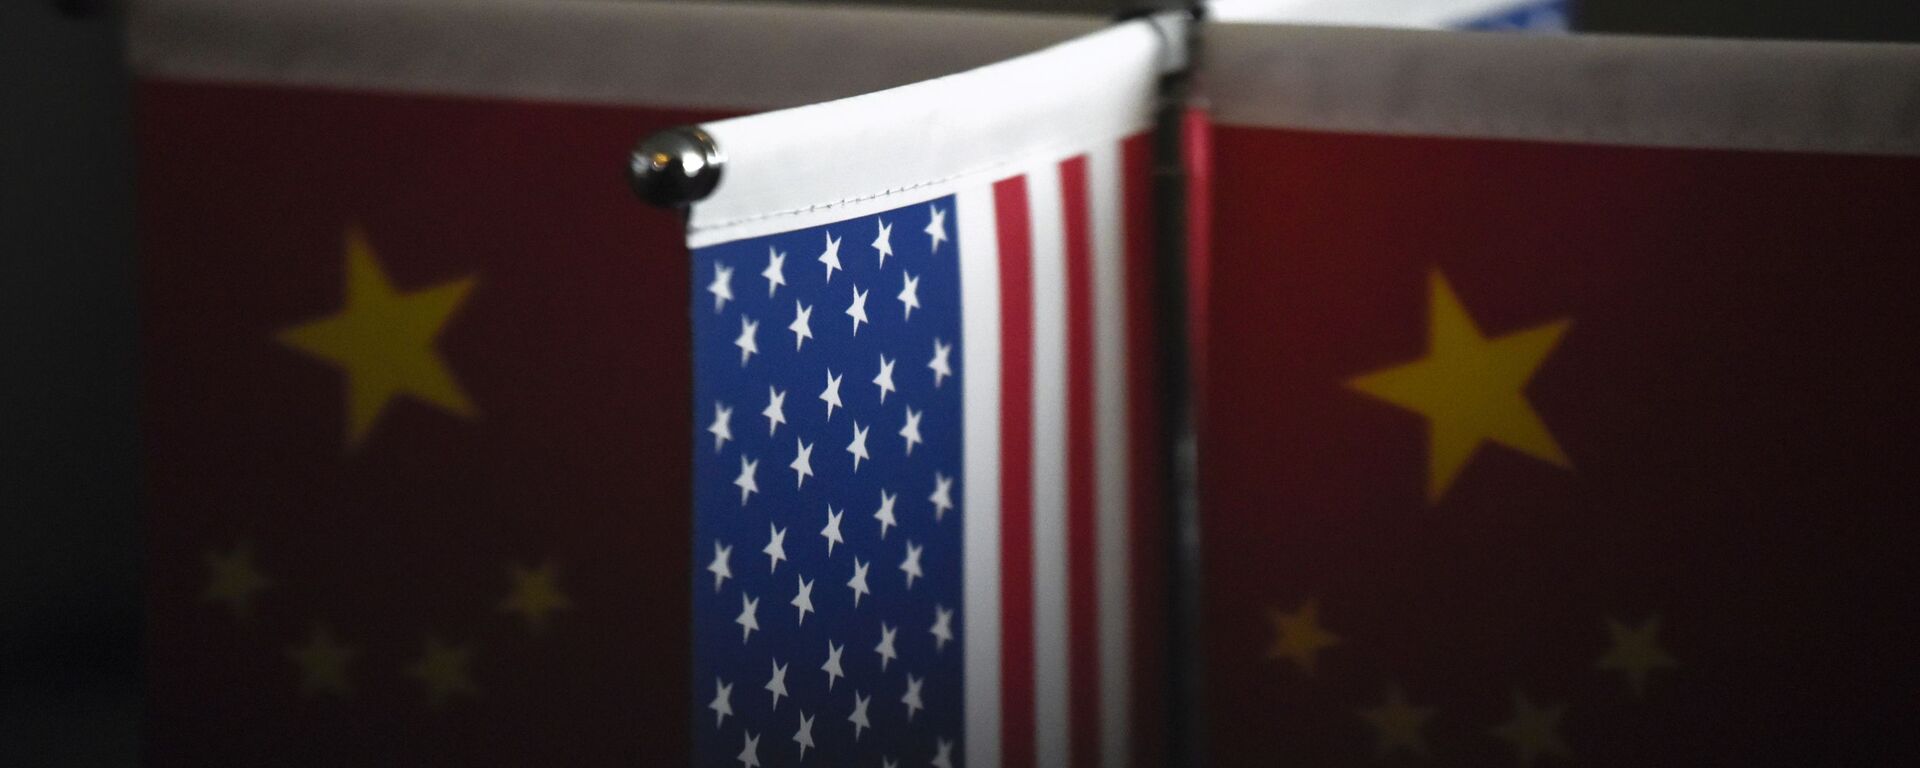 Chinese flags and American flags are displayed in a company in Beijing on August 16, 2017 - Sputnik International, 1920, 25.11.2021